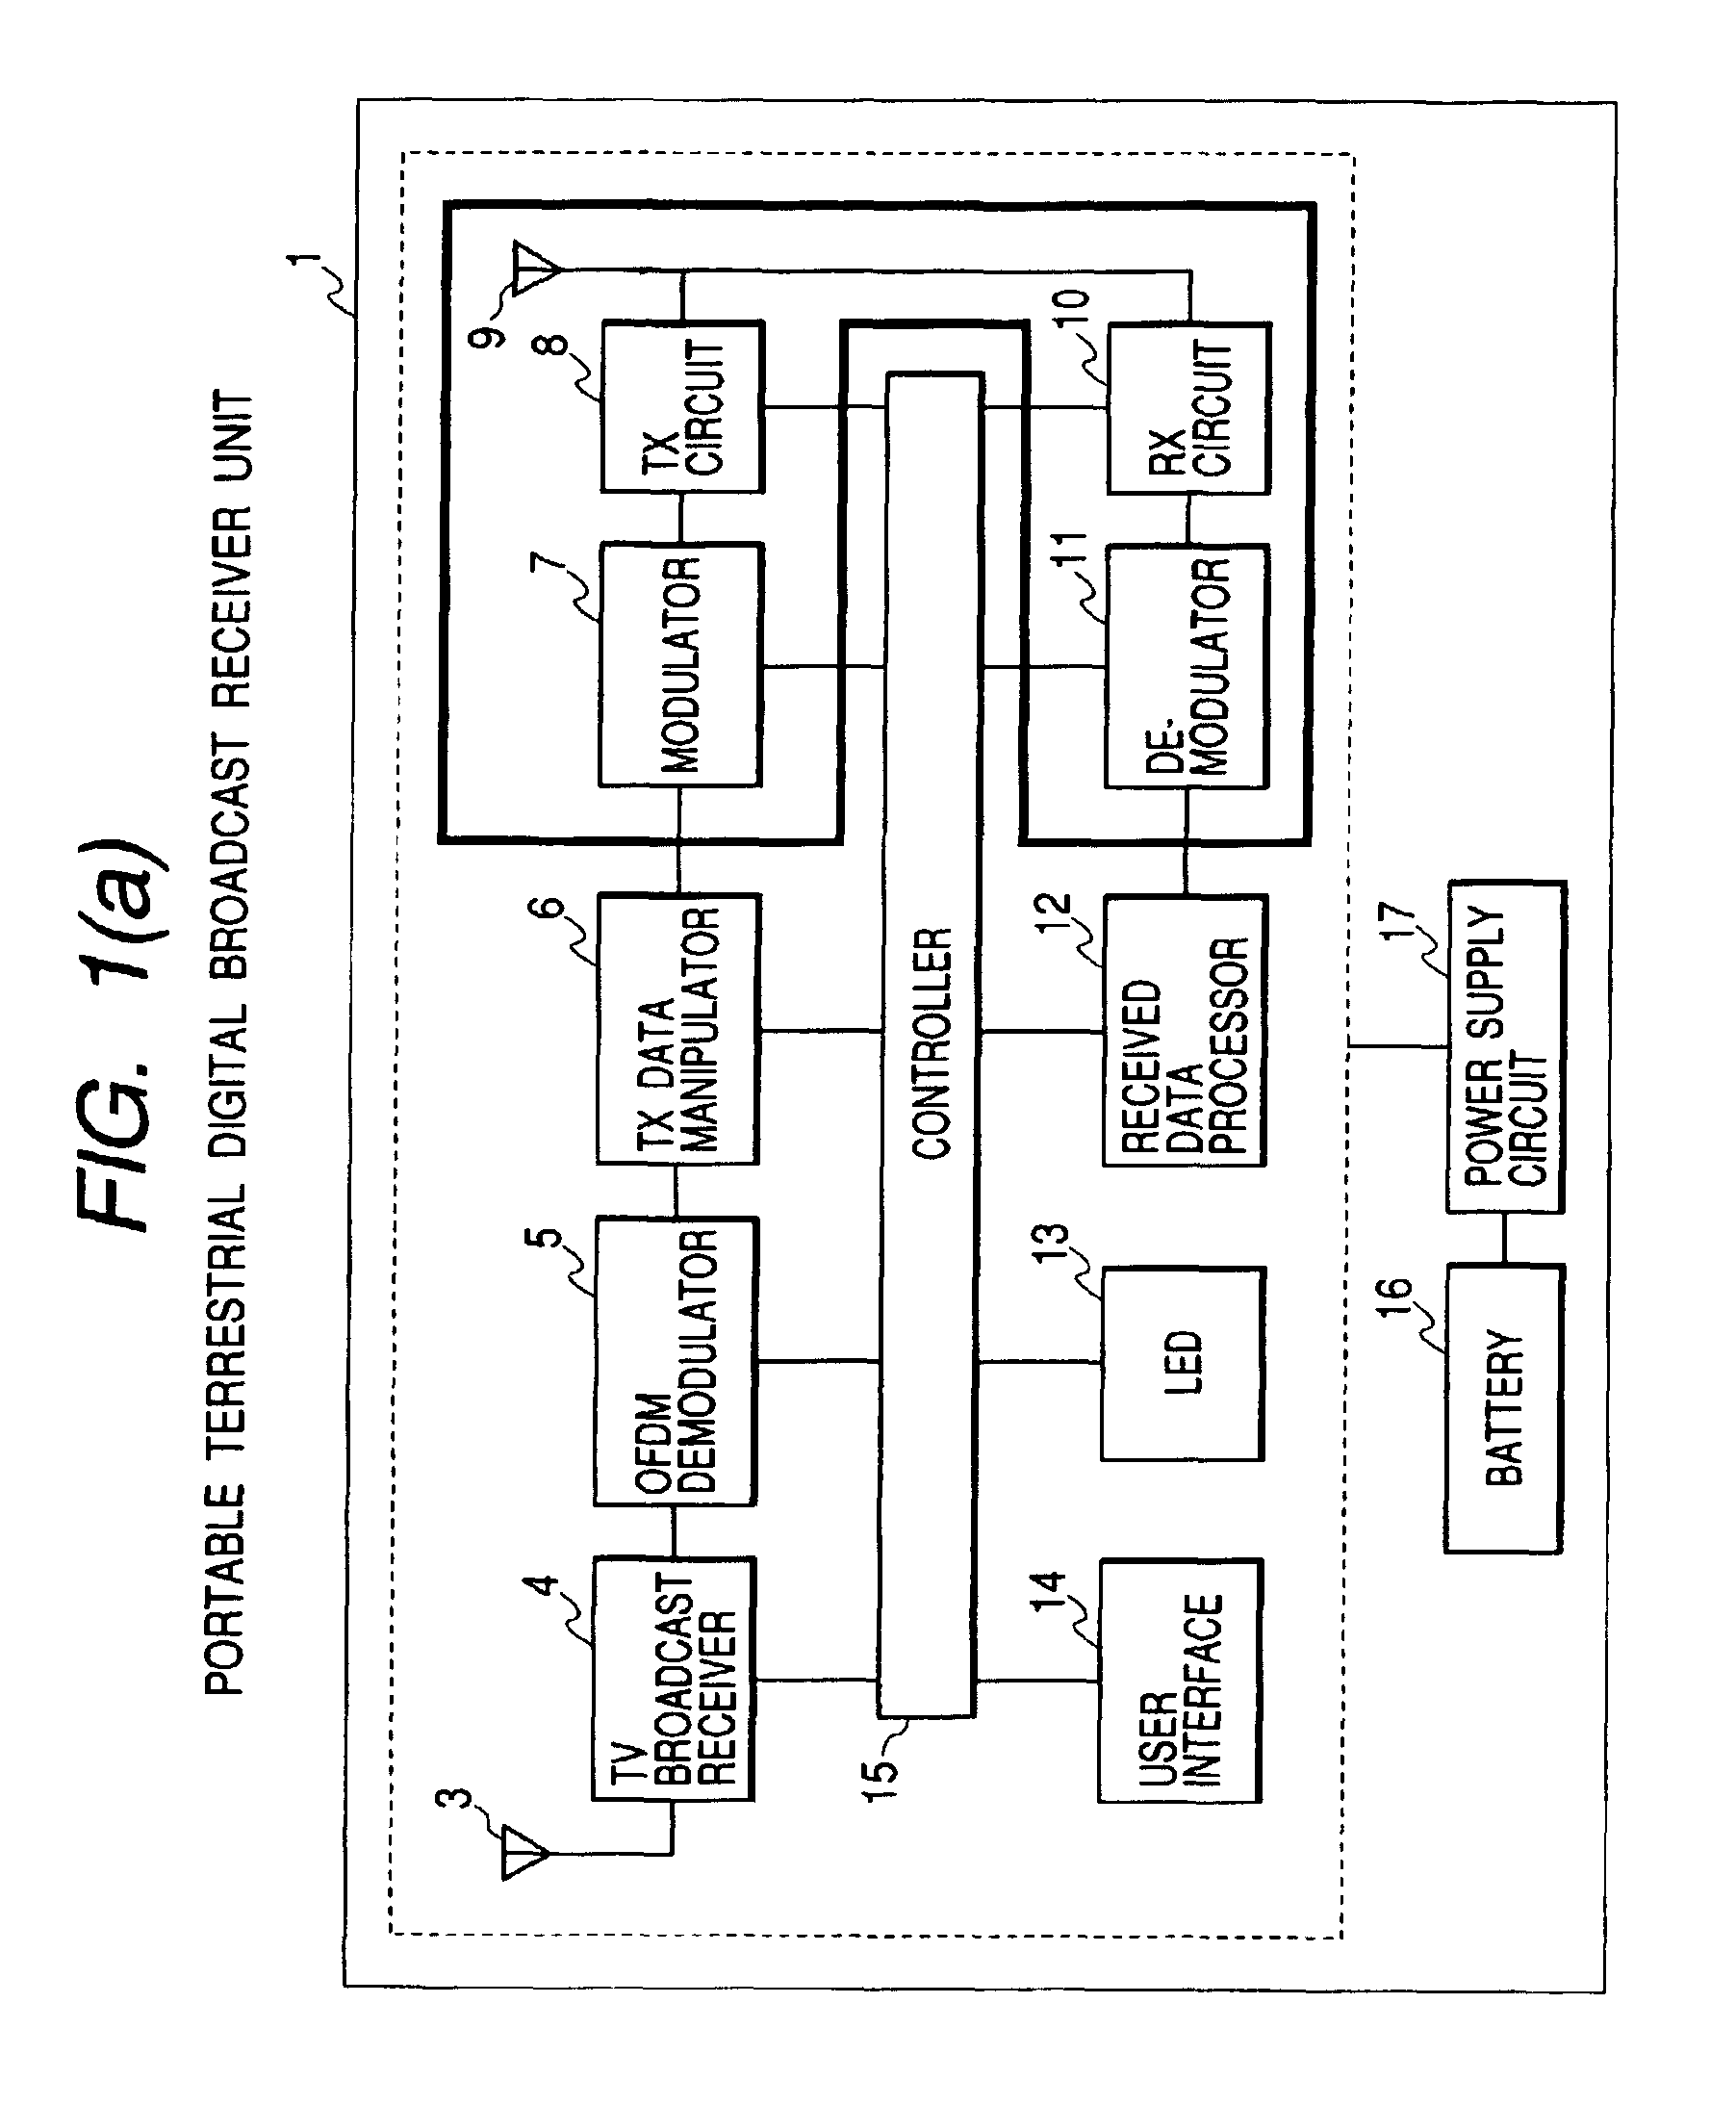 Digital broadcast channel reception system and method and portable terminal for use in such system